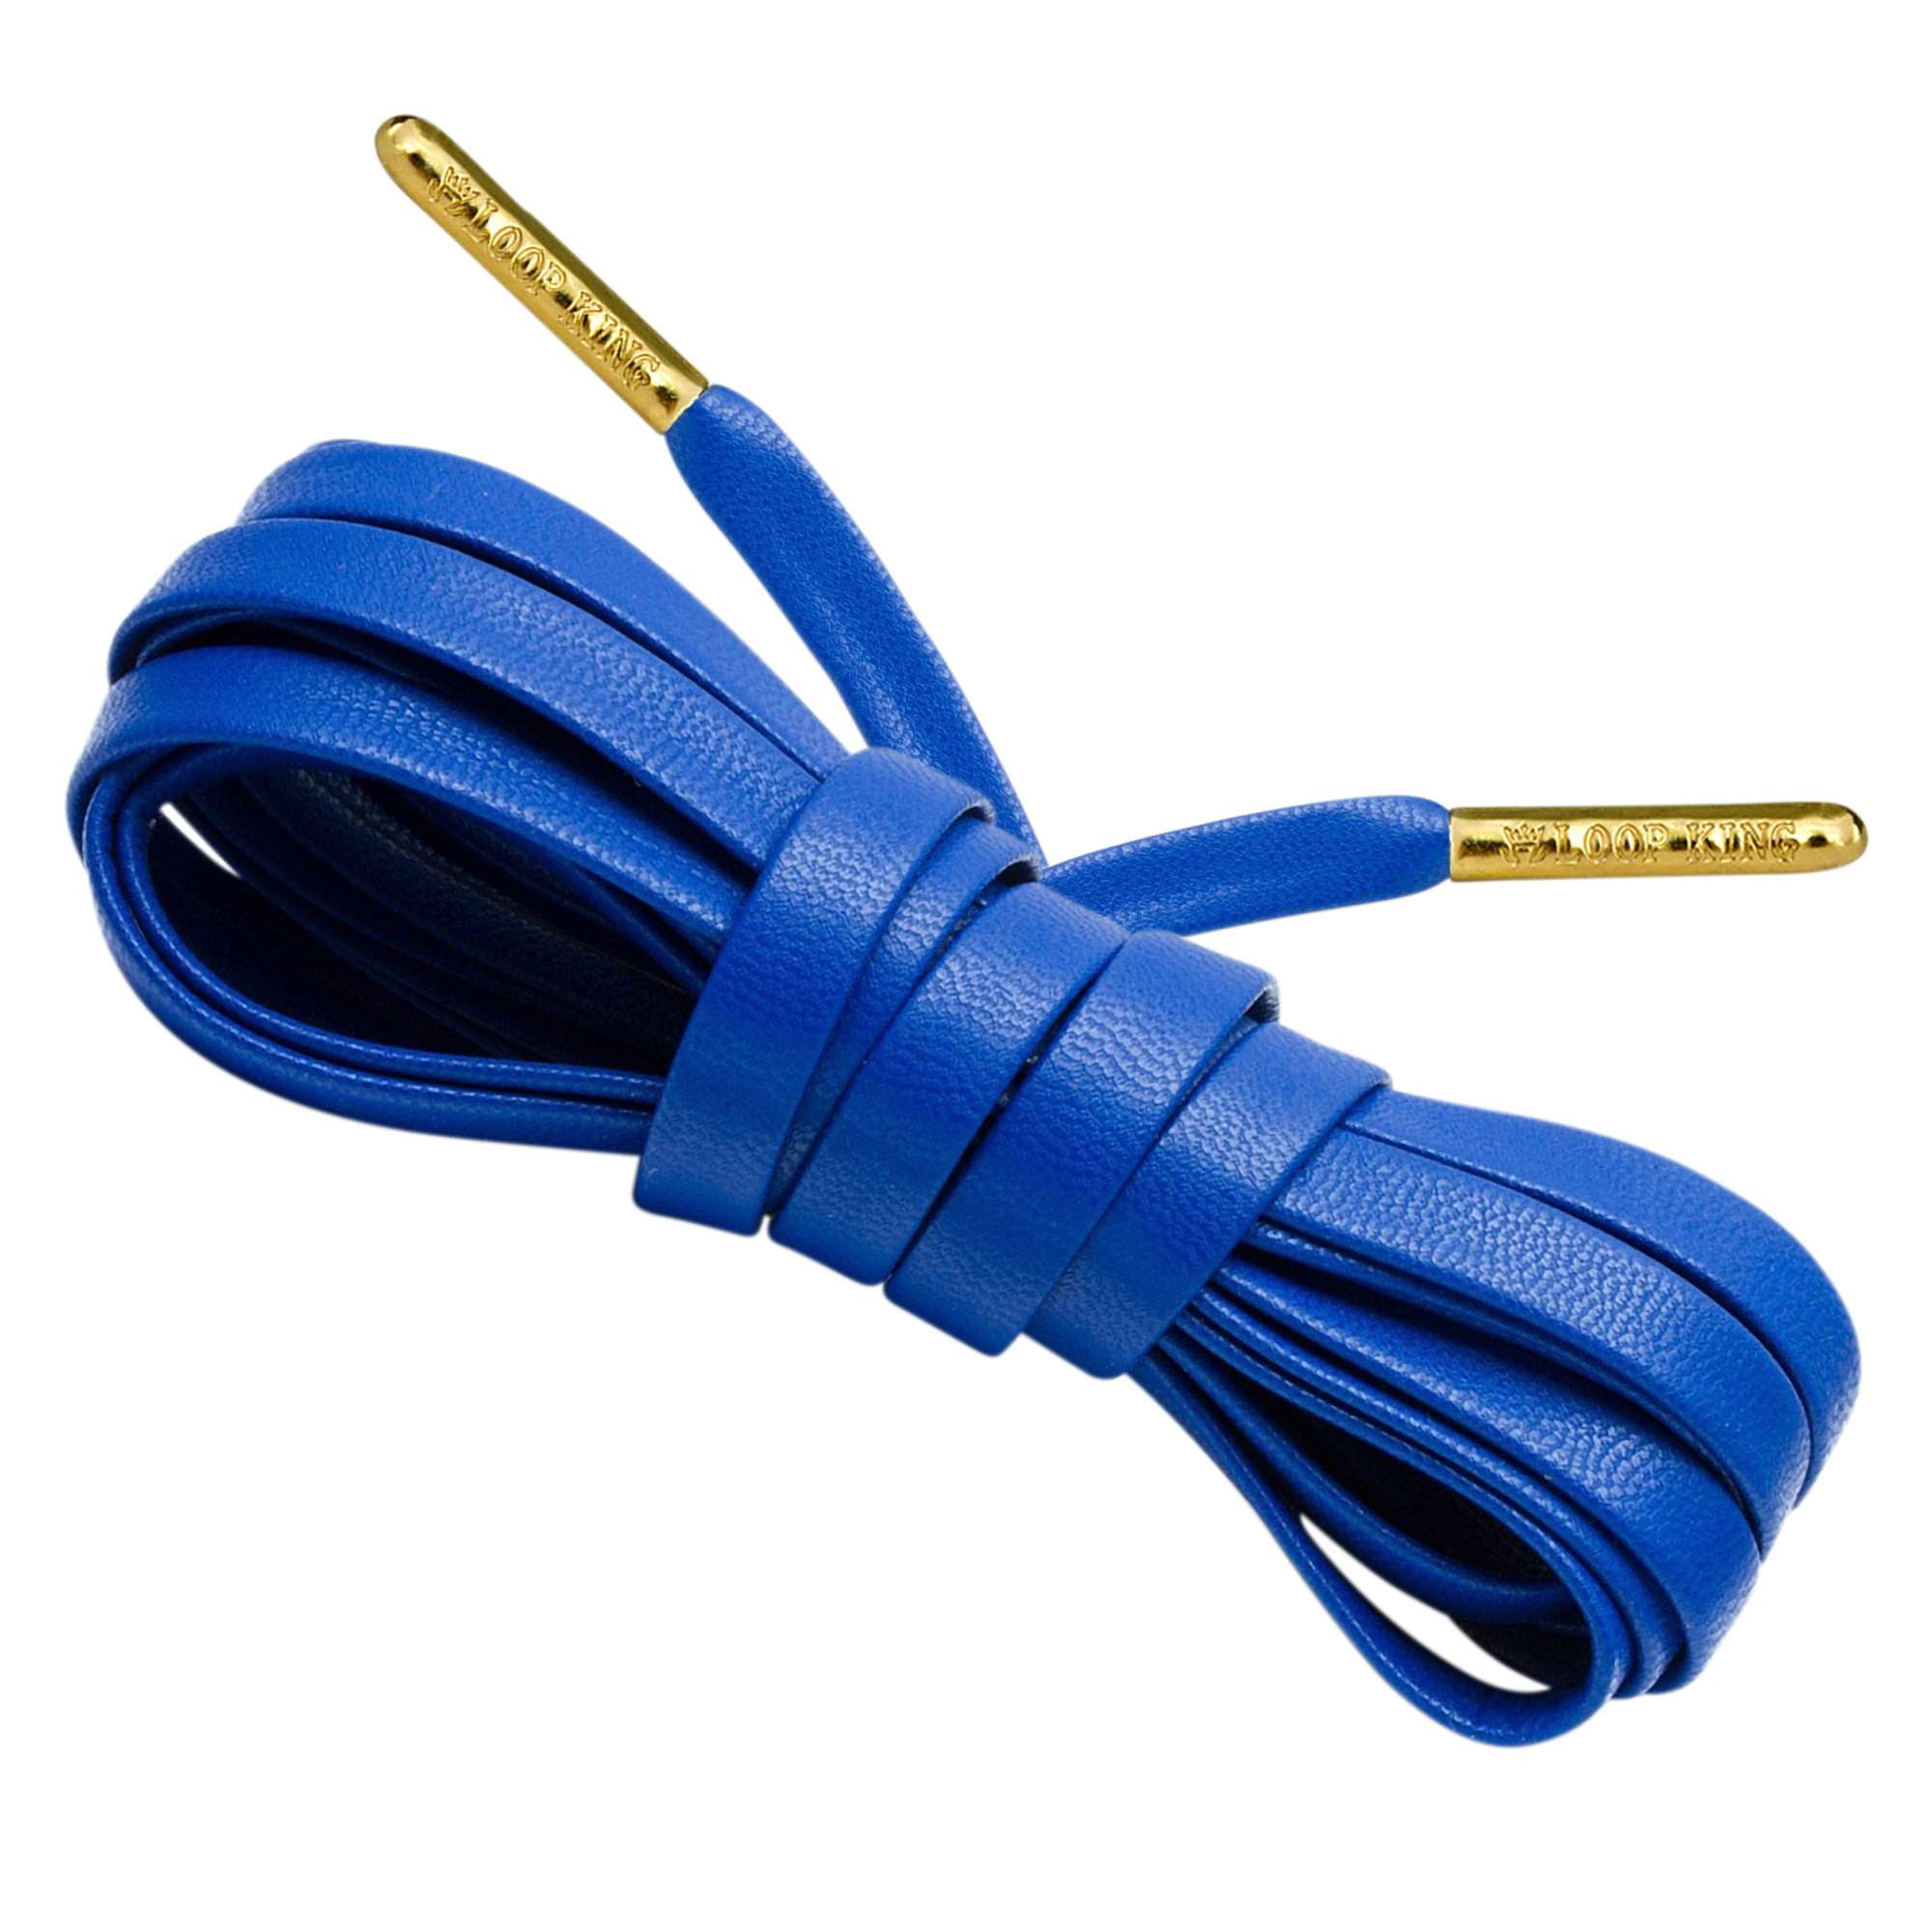 Luxury Royal Blue Leather Shoe Laces with Gold Tips From Loop King